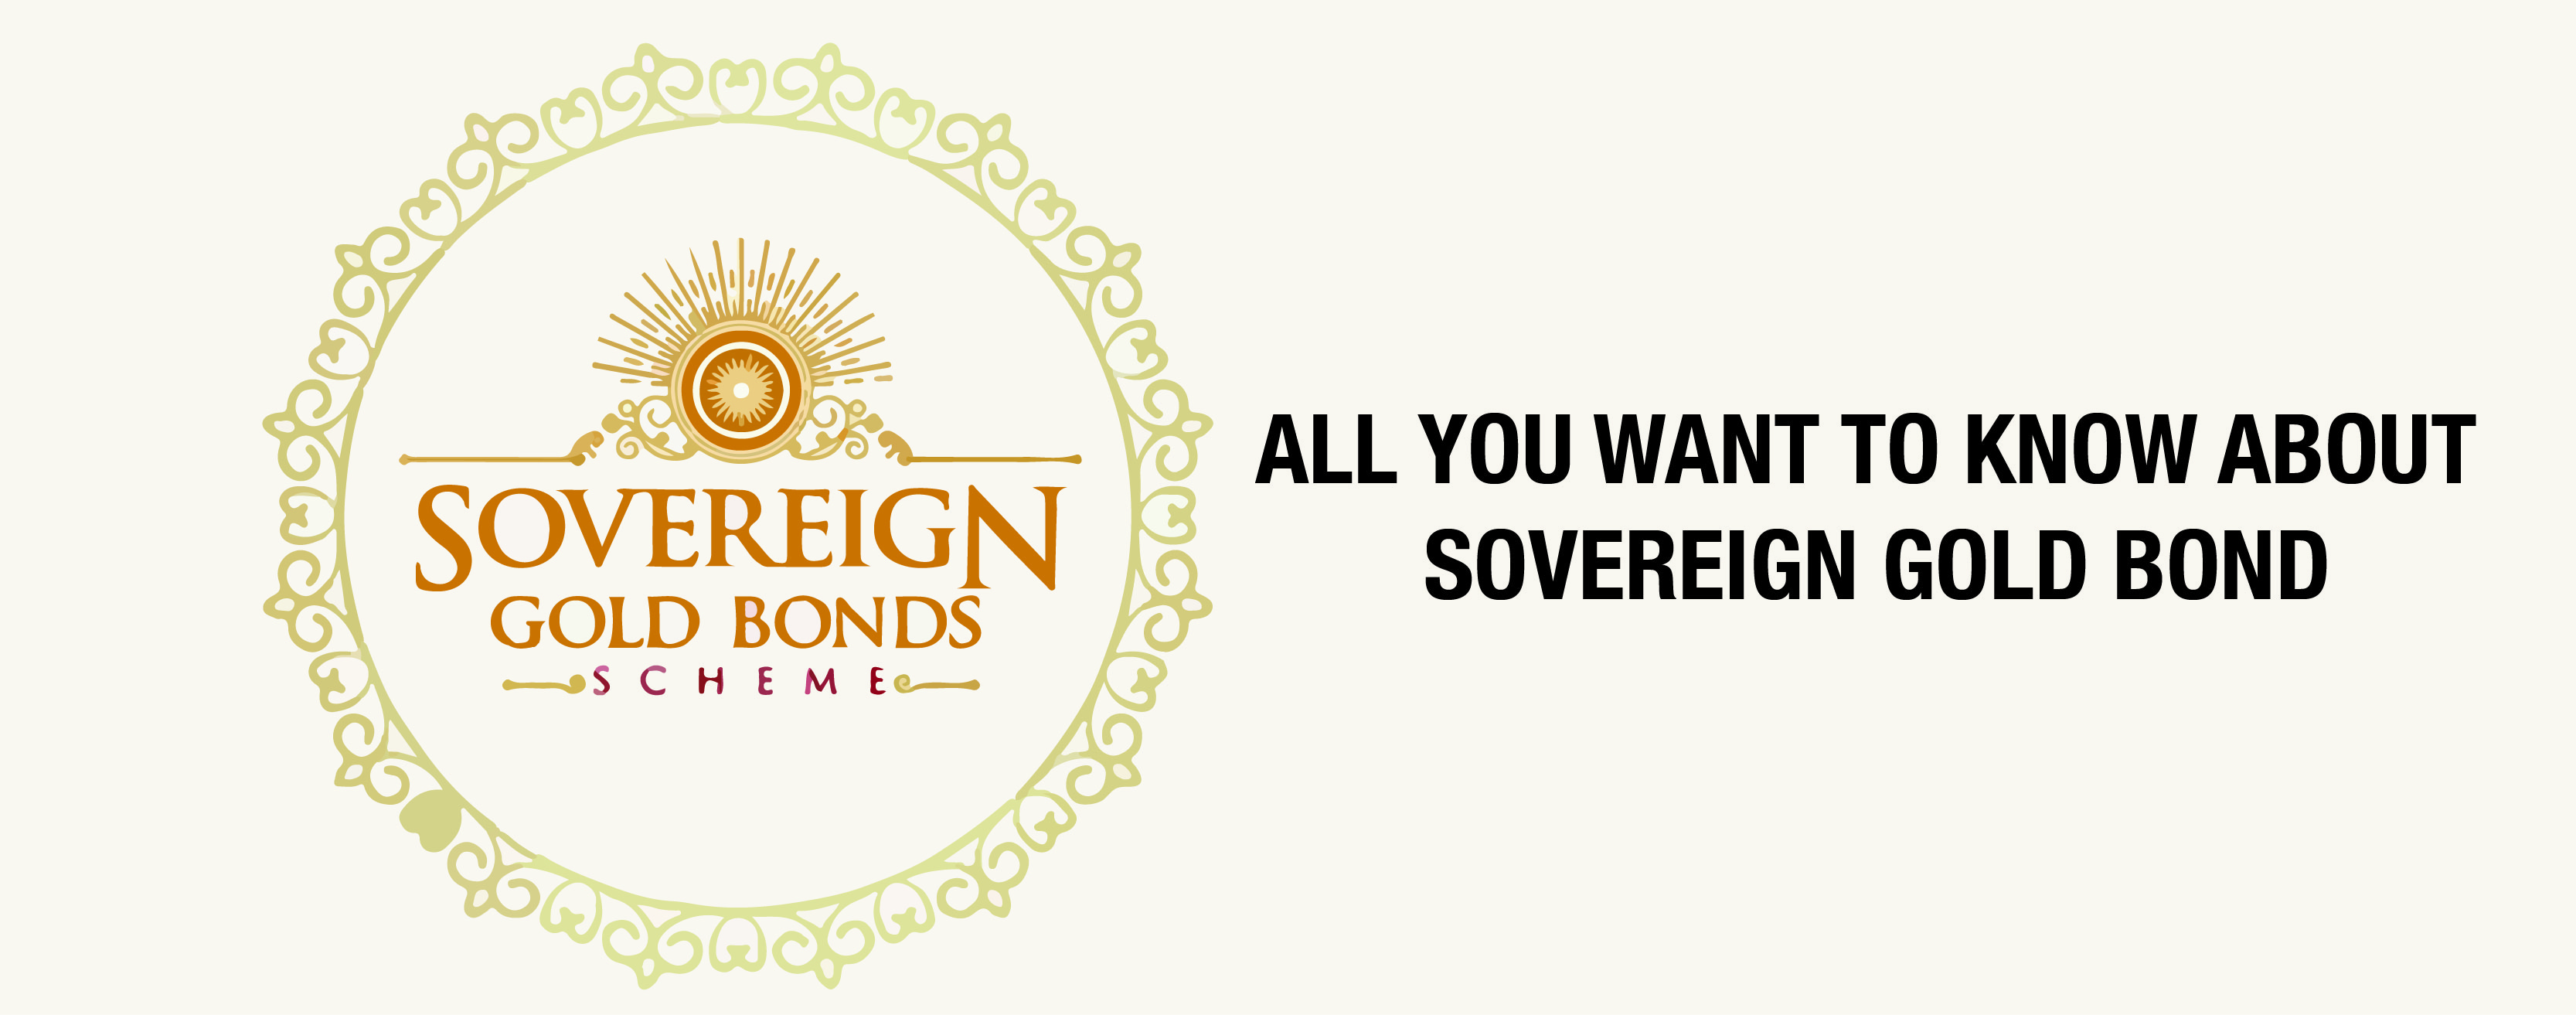 Sovereign gold bond scheme All you want to know